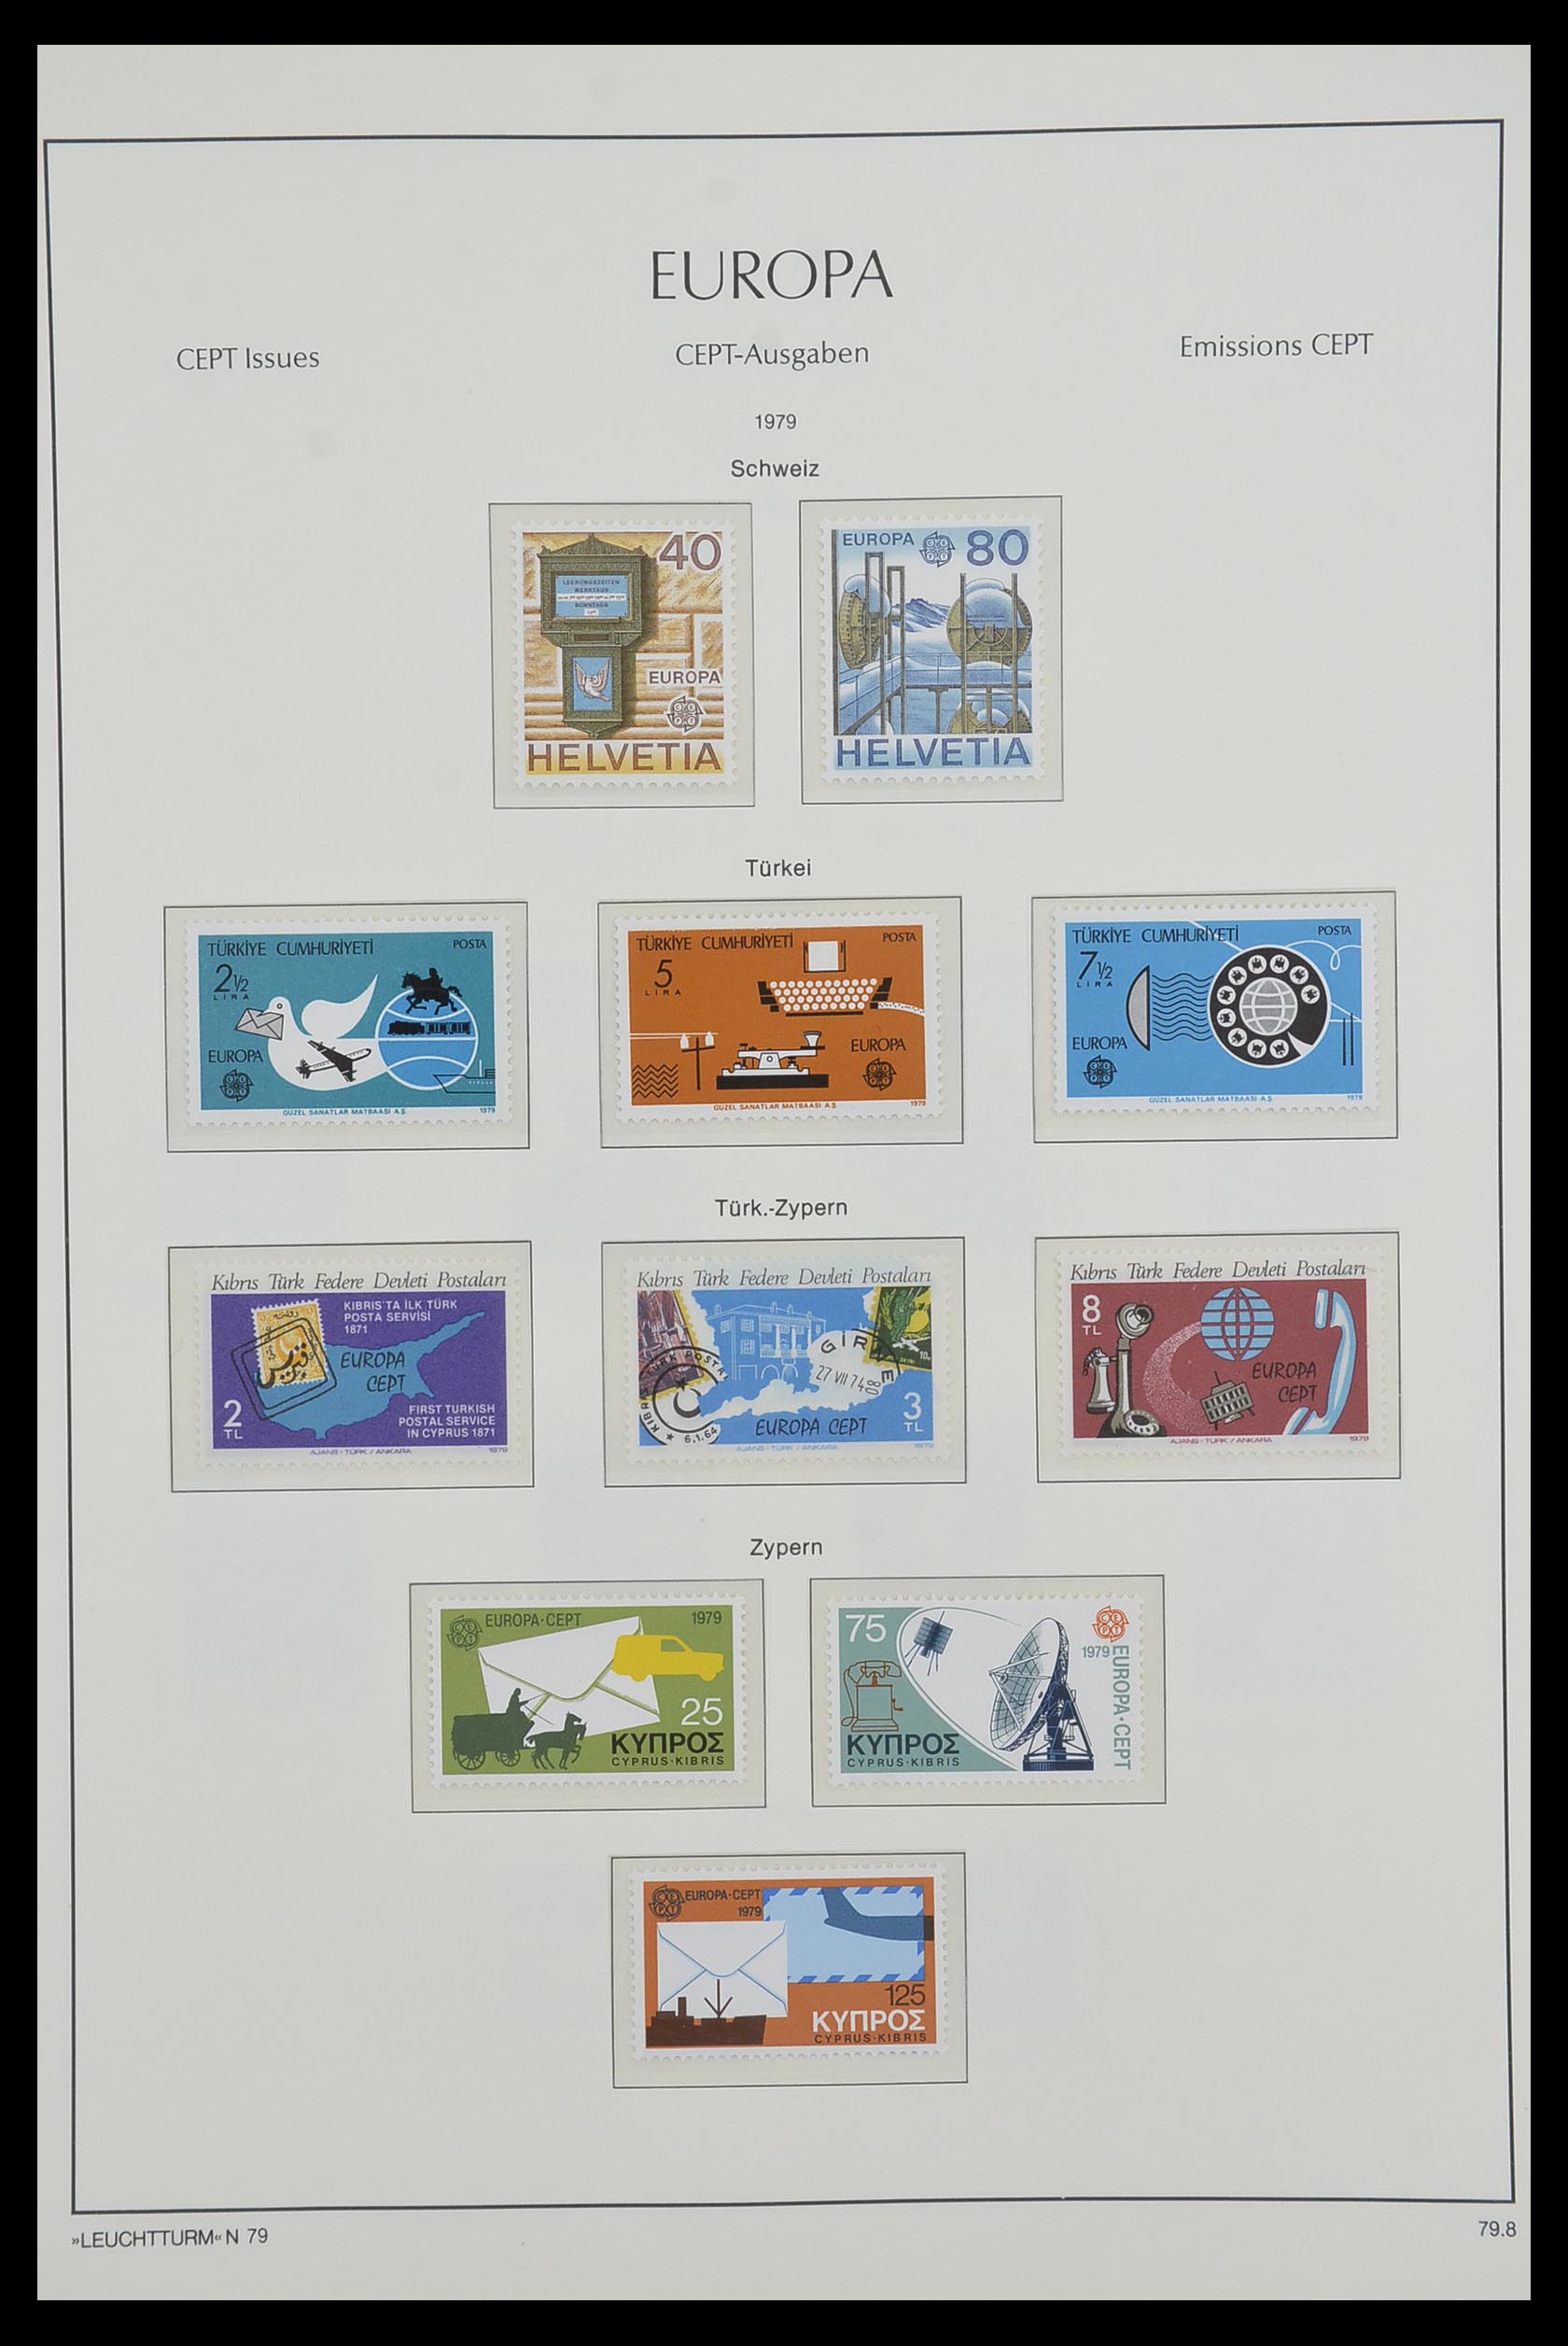 33524 023 - Stamp collection 33524 Europa CEPT 1977-2011.